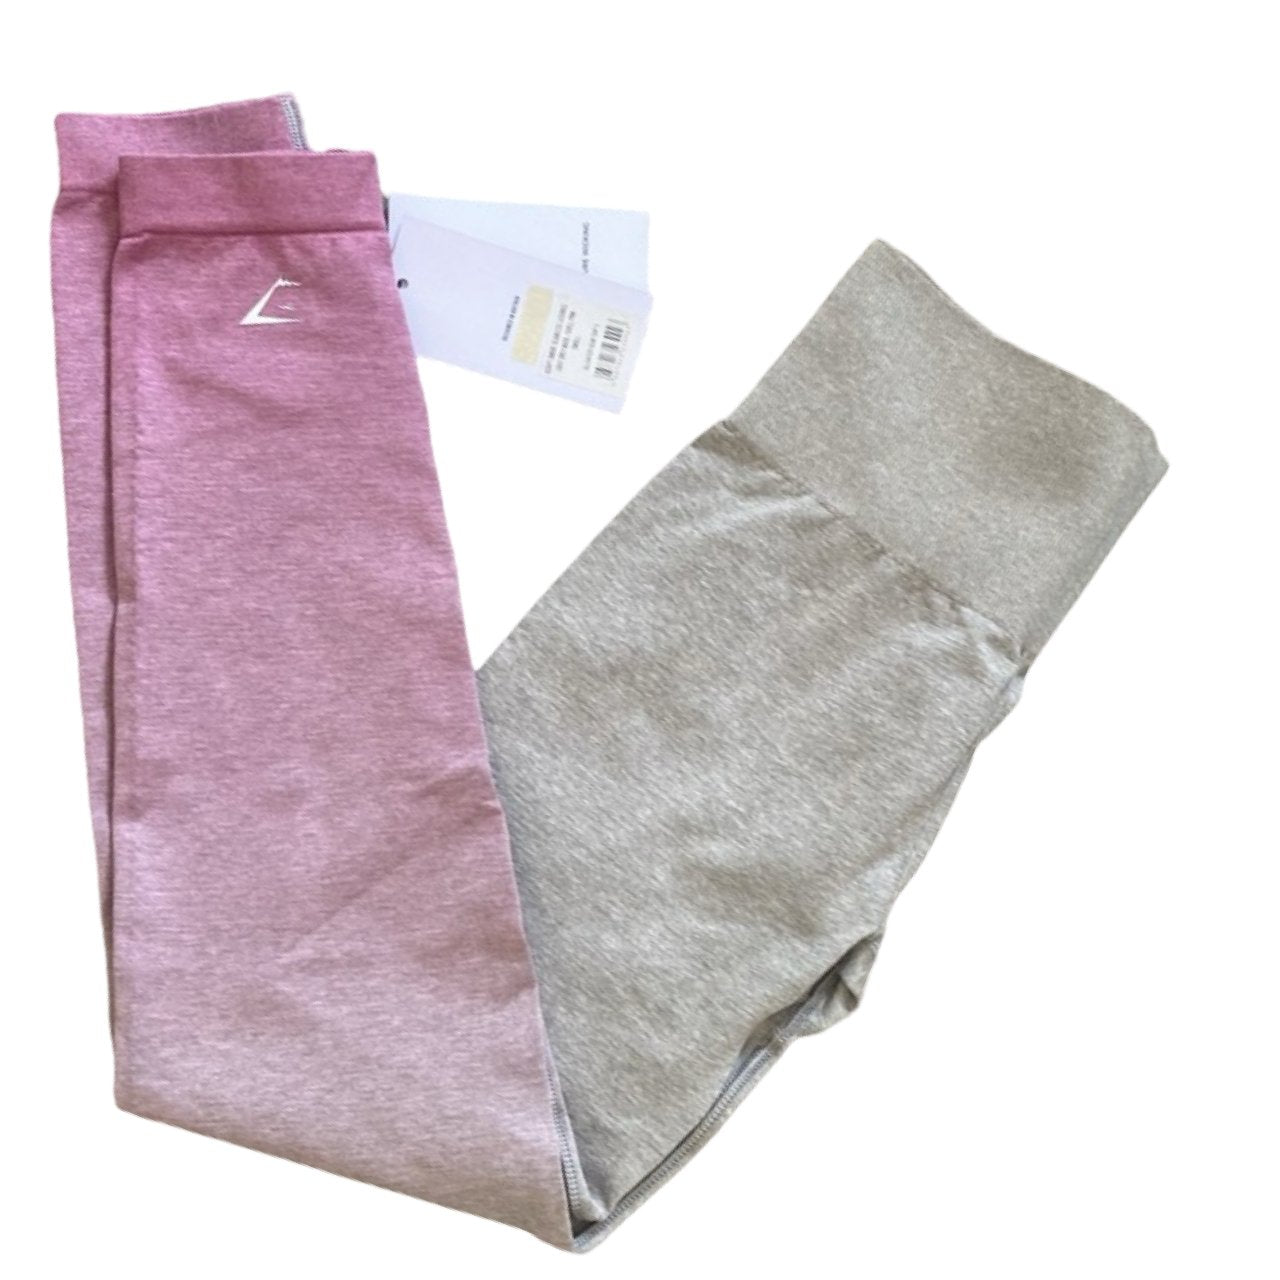 Gymshark Adapt Ombre Seamless Leggings for Women in Grey & Pink come - Soul and Sense Streetwear